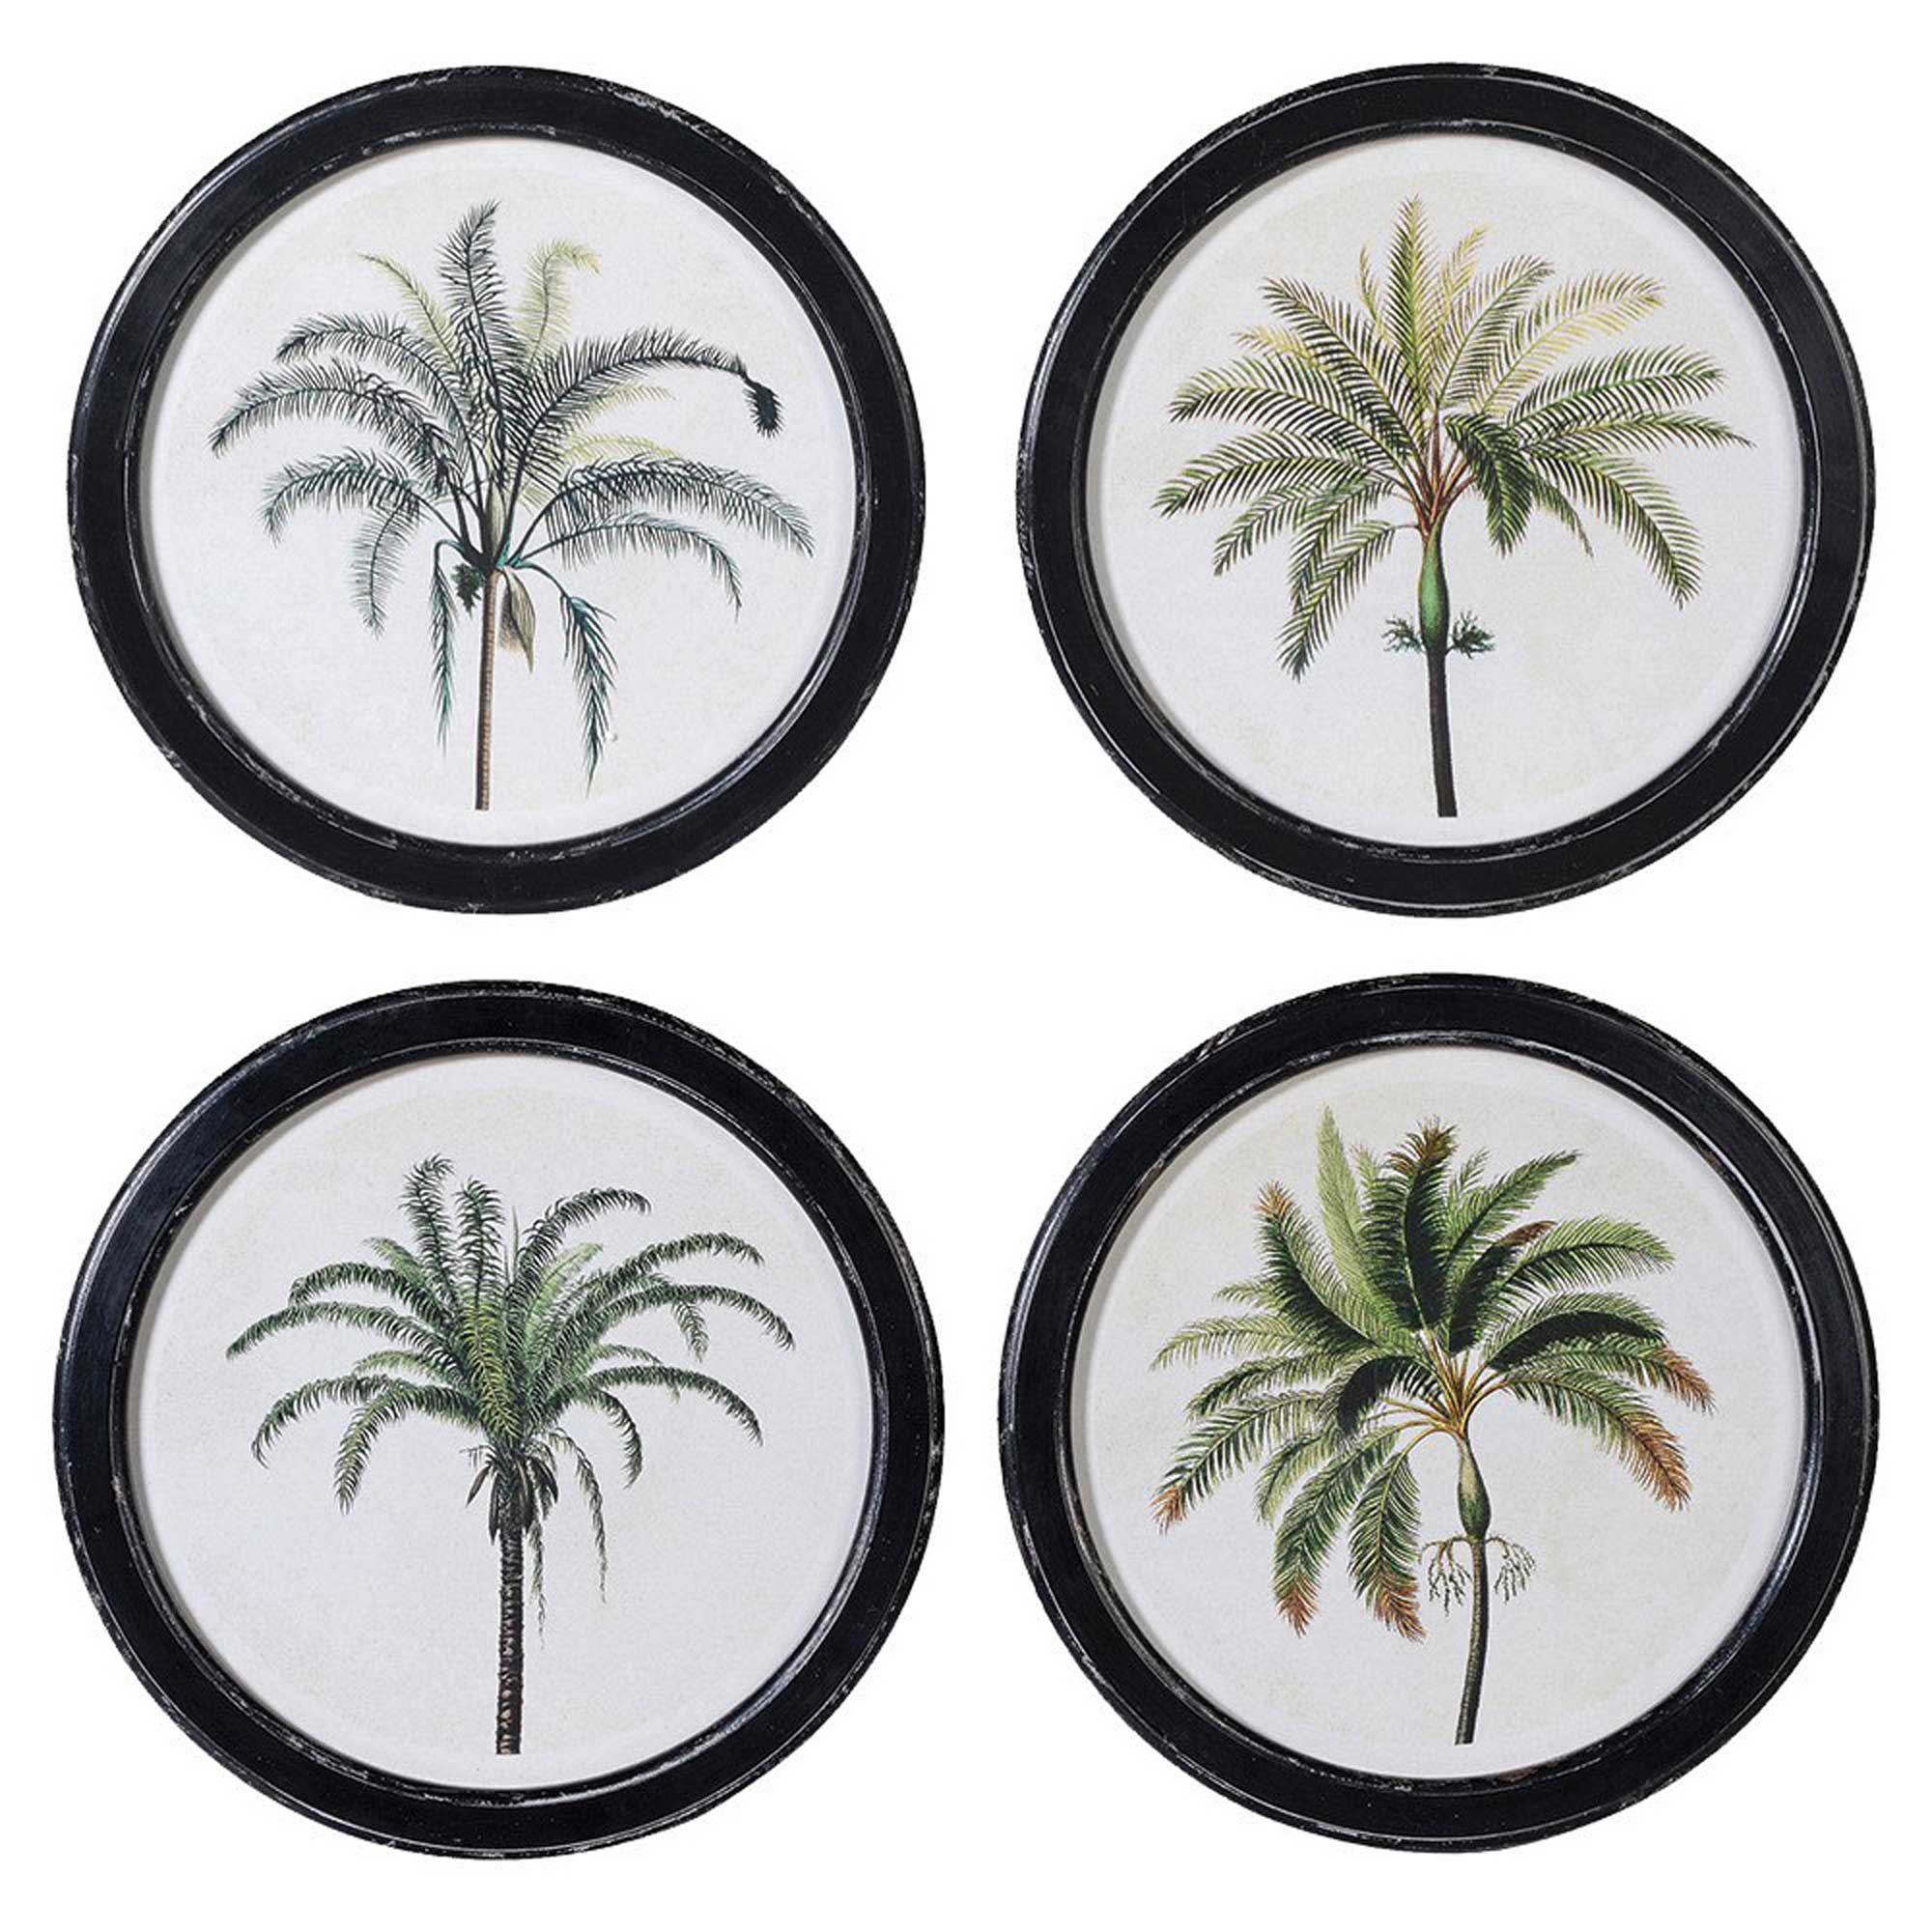 Set of 4 Round Palm Pictures Print, Round | Barker & Stonehouse